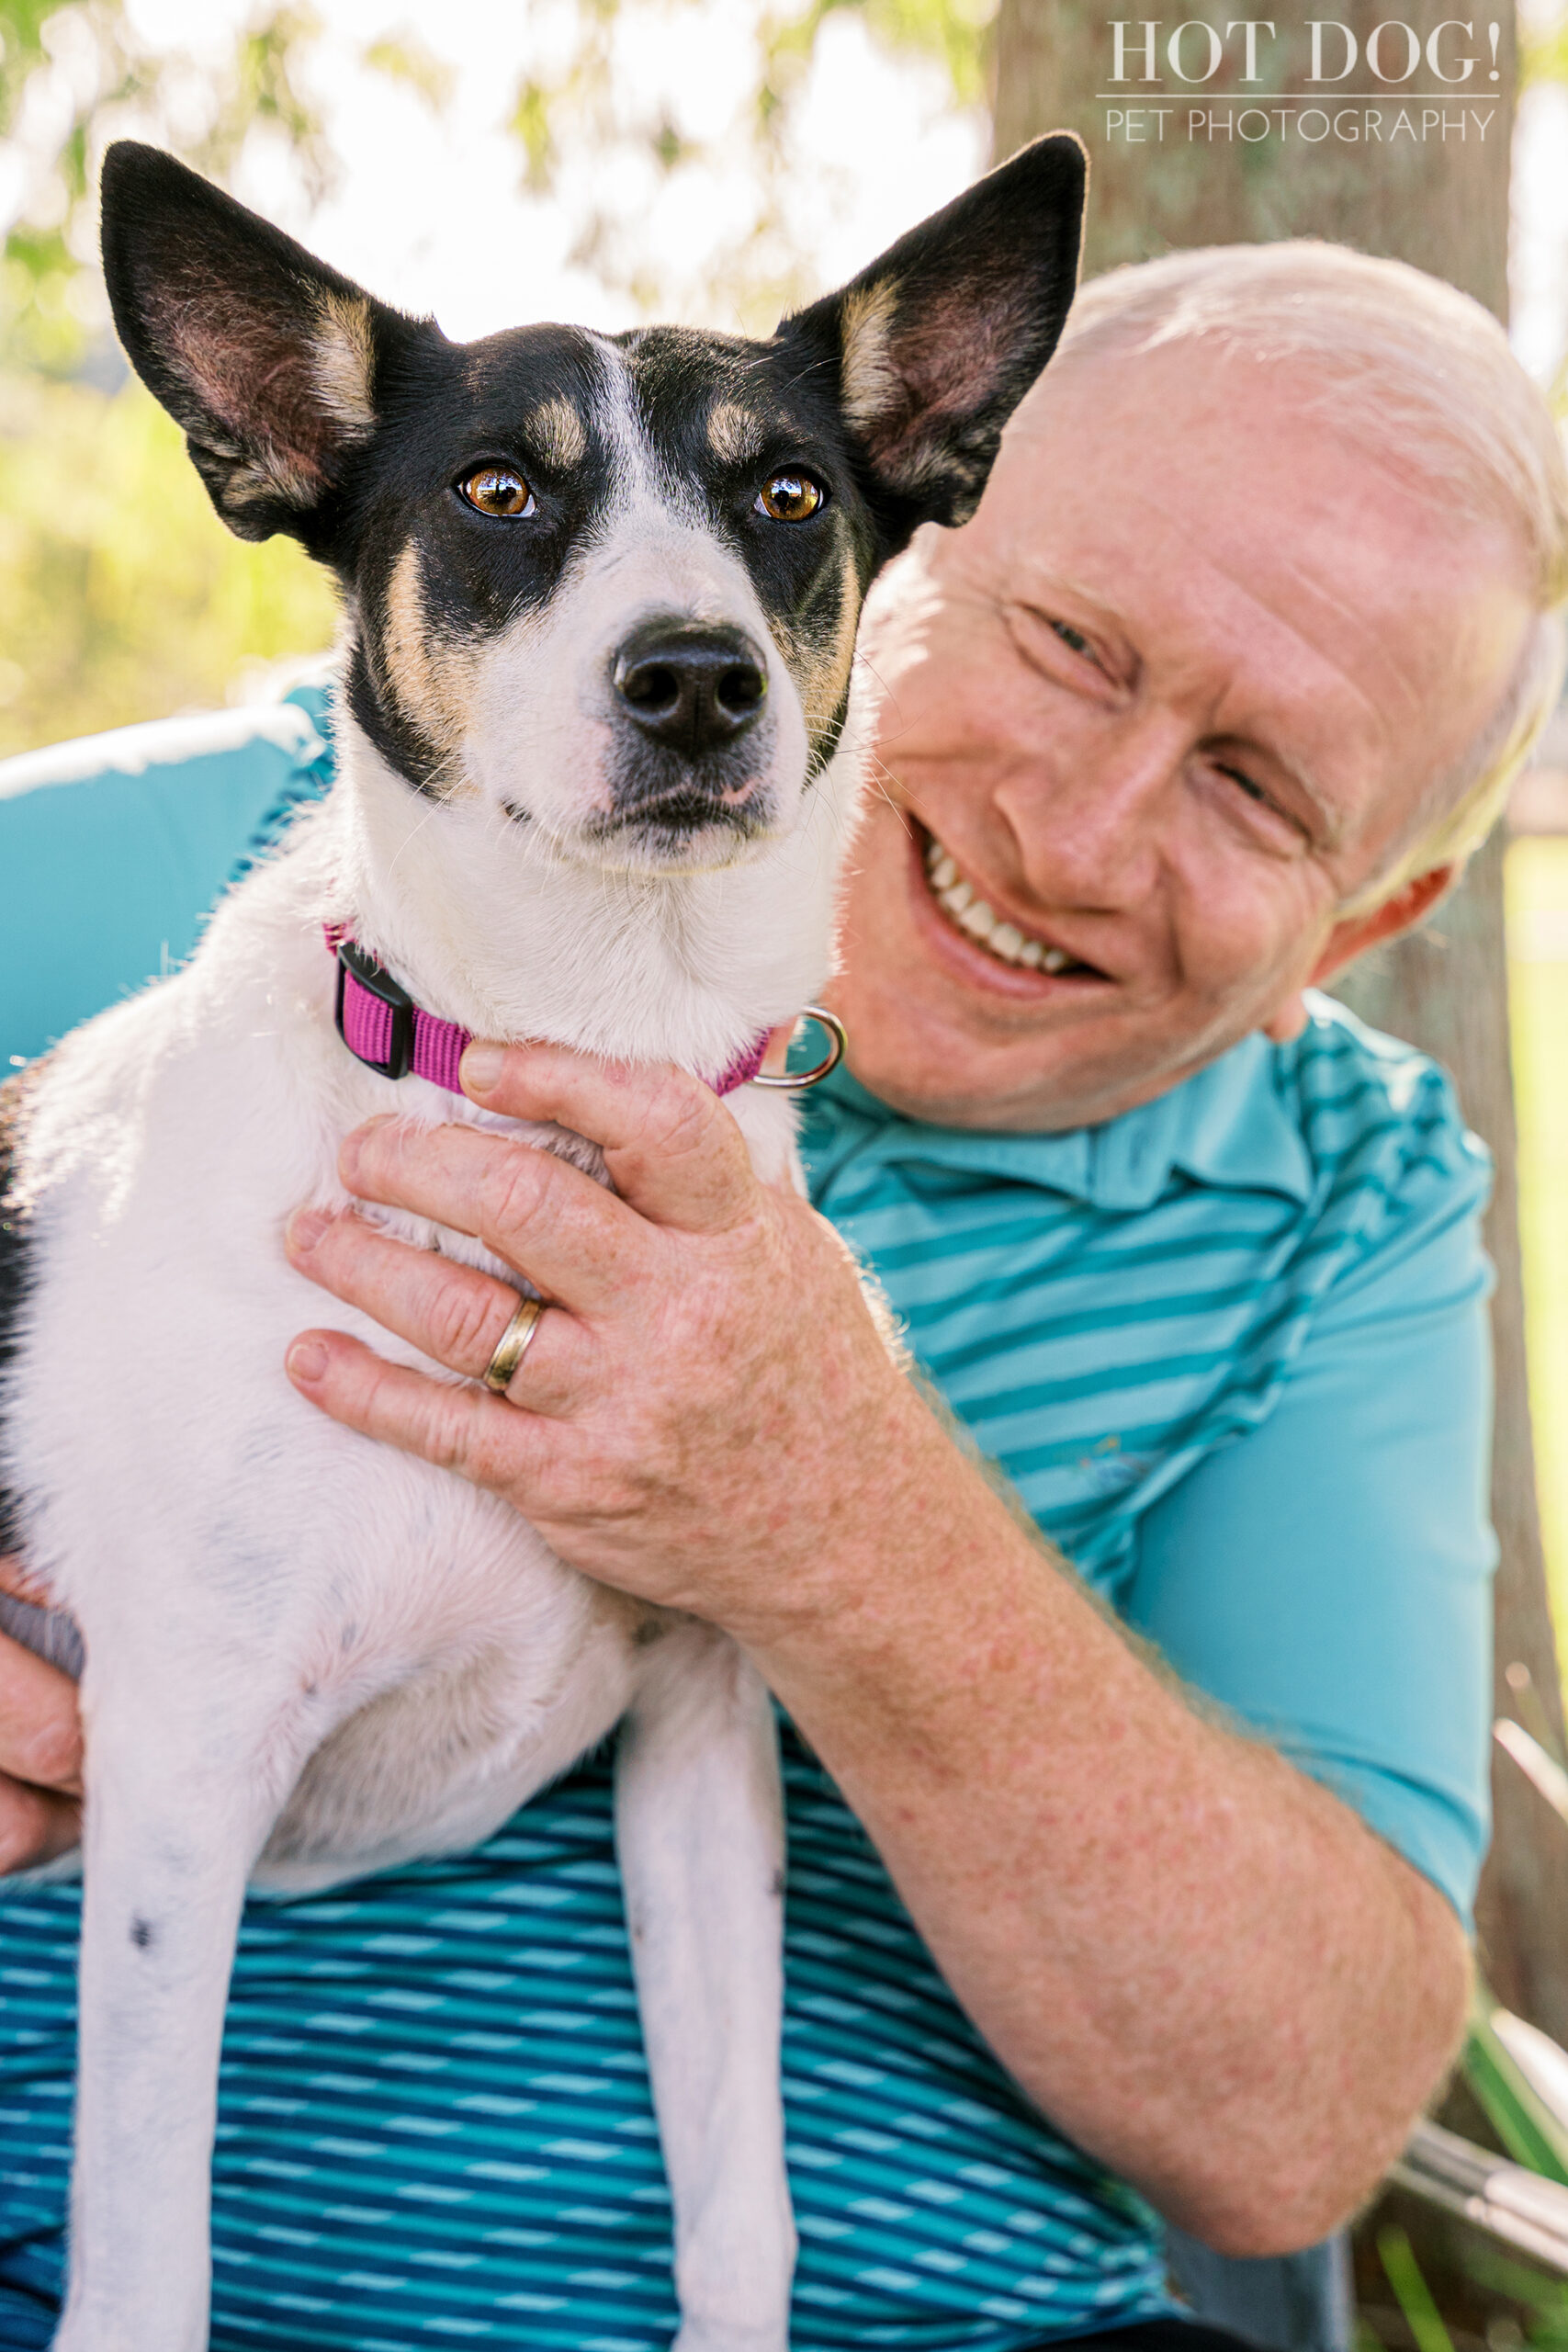 Tail Wags and Happy Tears: Miracle, the rescued rat terrier mix, celebrates her newfound happiness with her adoptive parents in this heartwarming photo by Orlando pet photographer Hot Dog! Pet Photography.